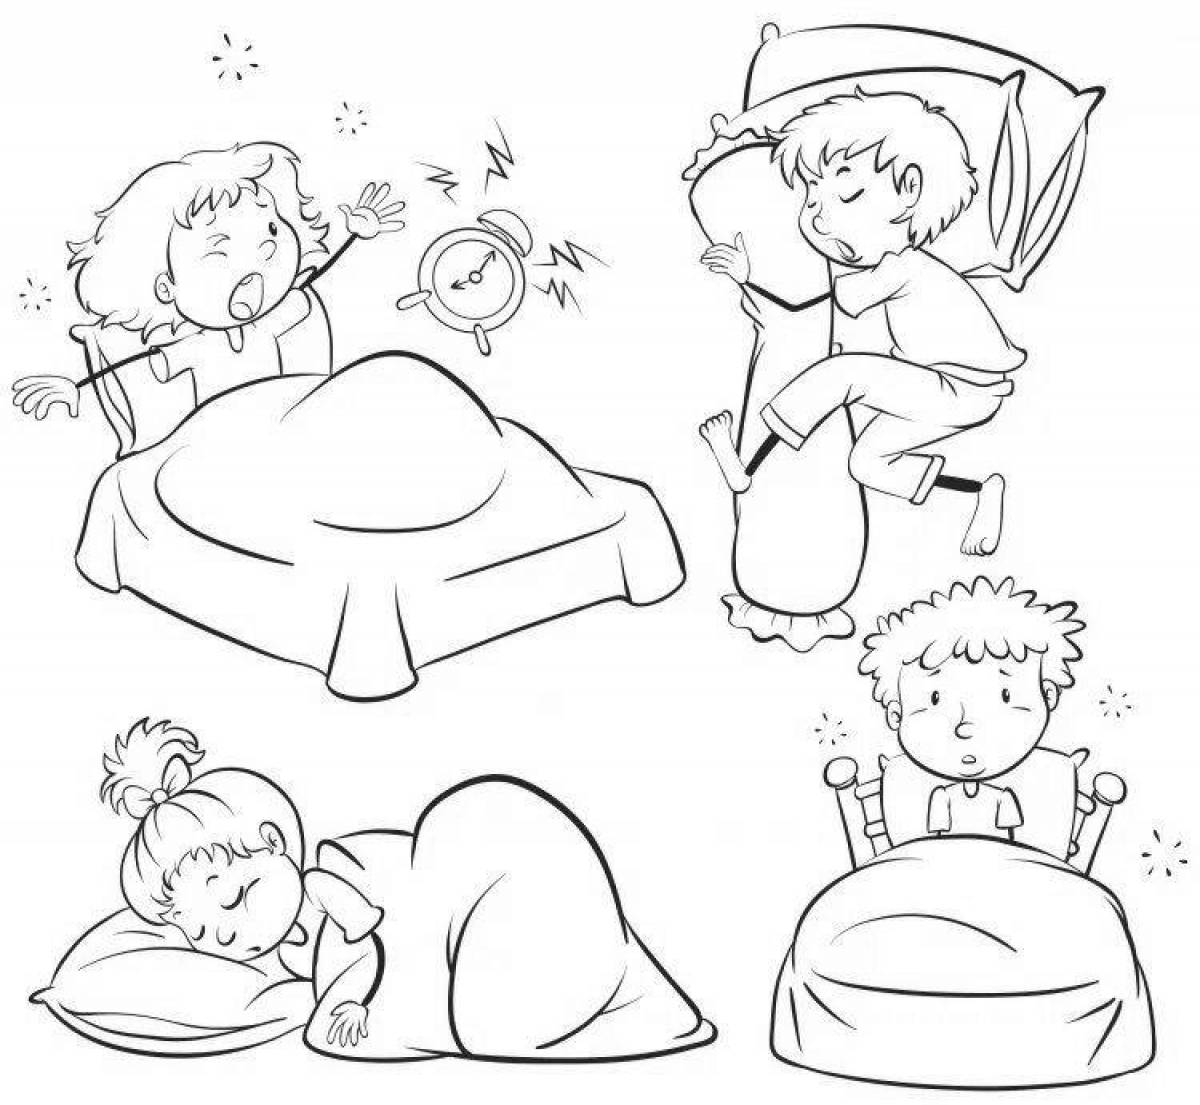 Coloring page affectionate sleeping boy